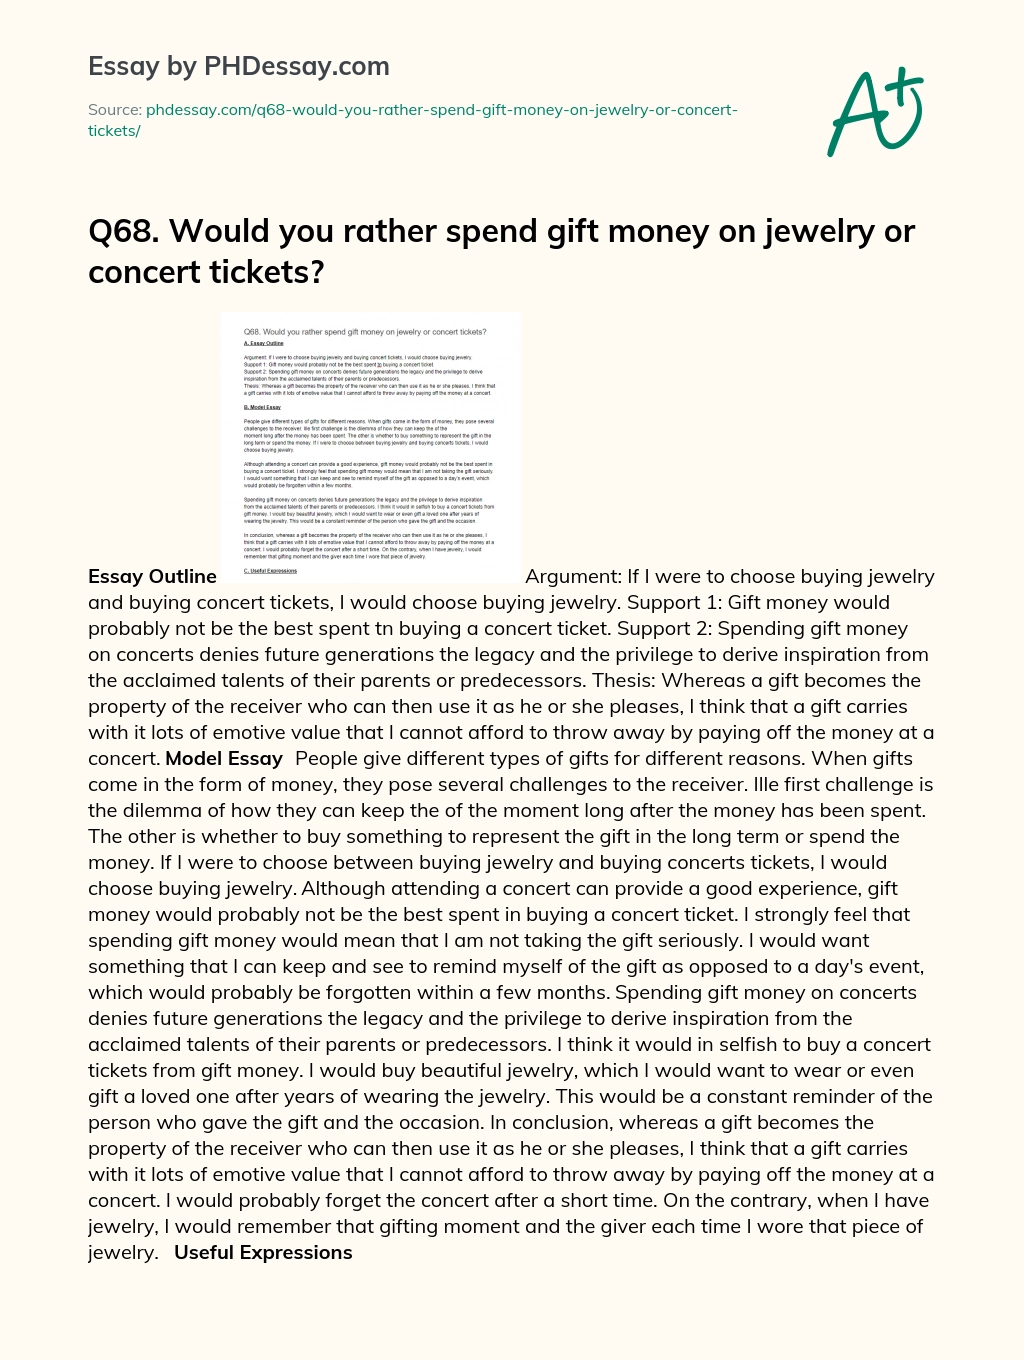 Q68. Would you rather spend gift money on jewelry or concert tickets? essay